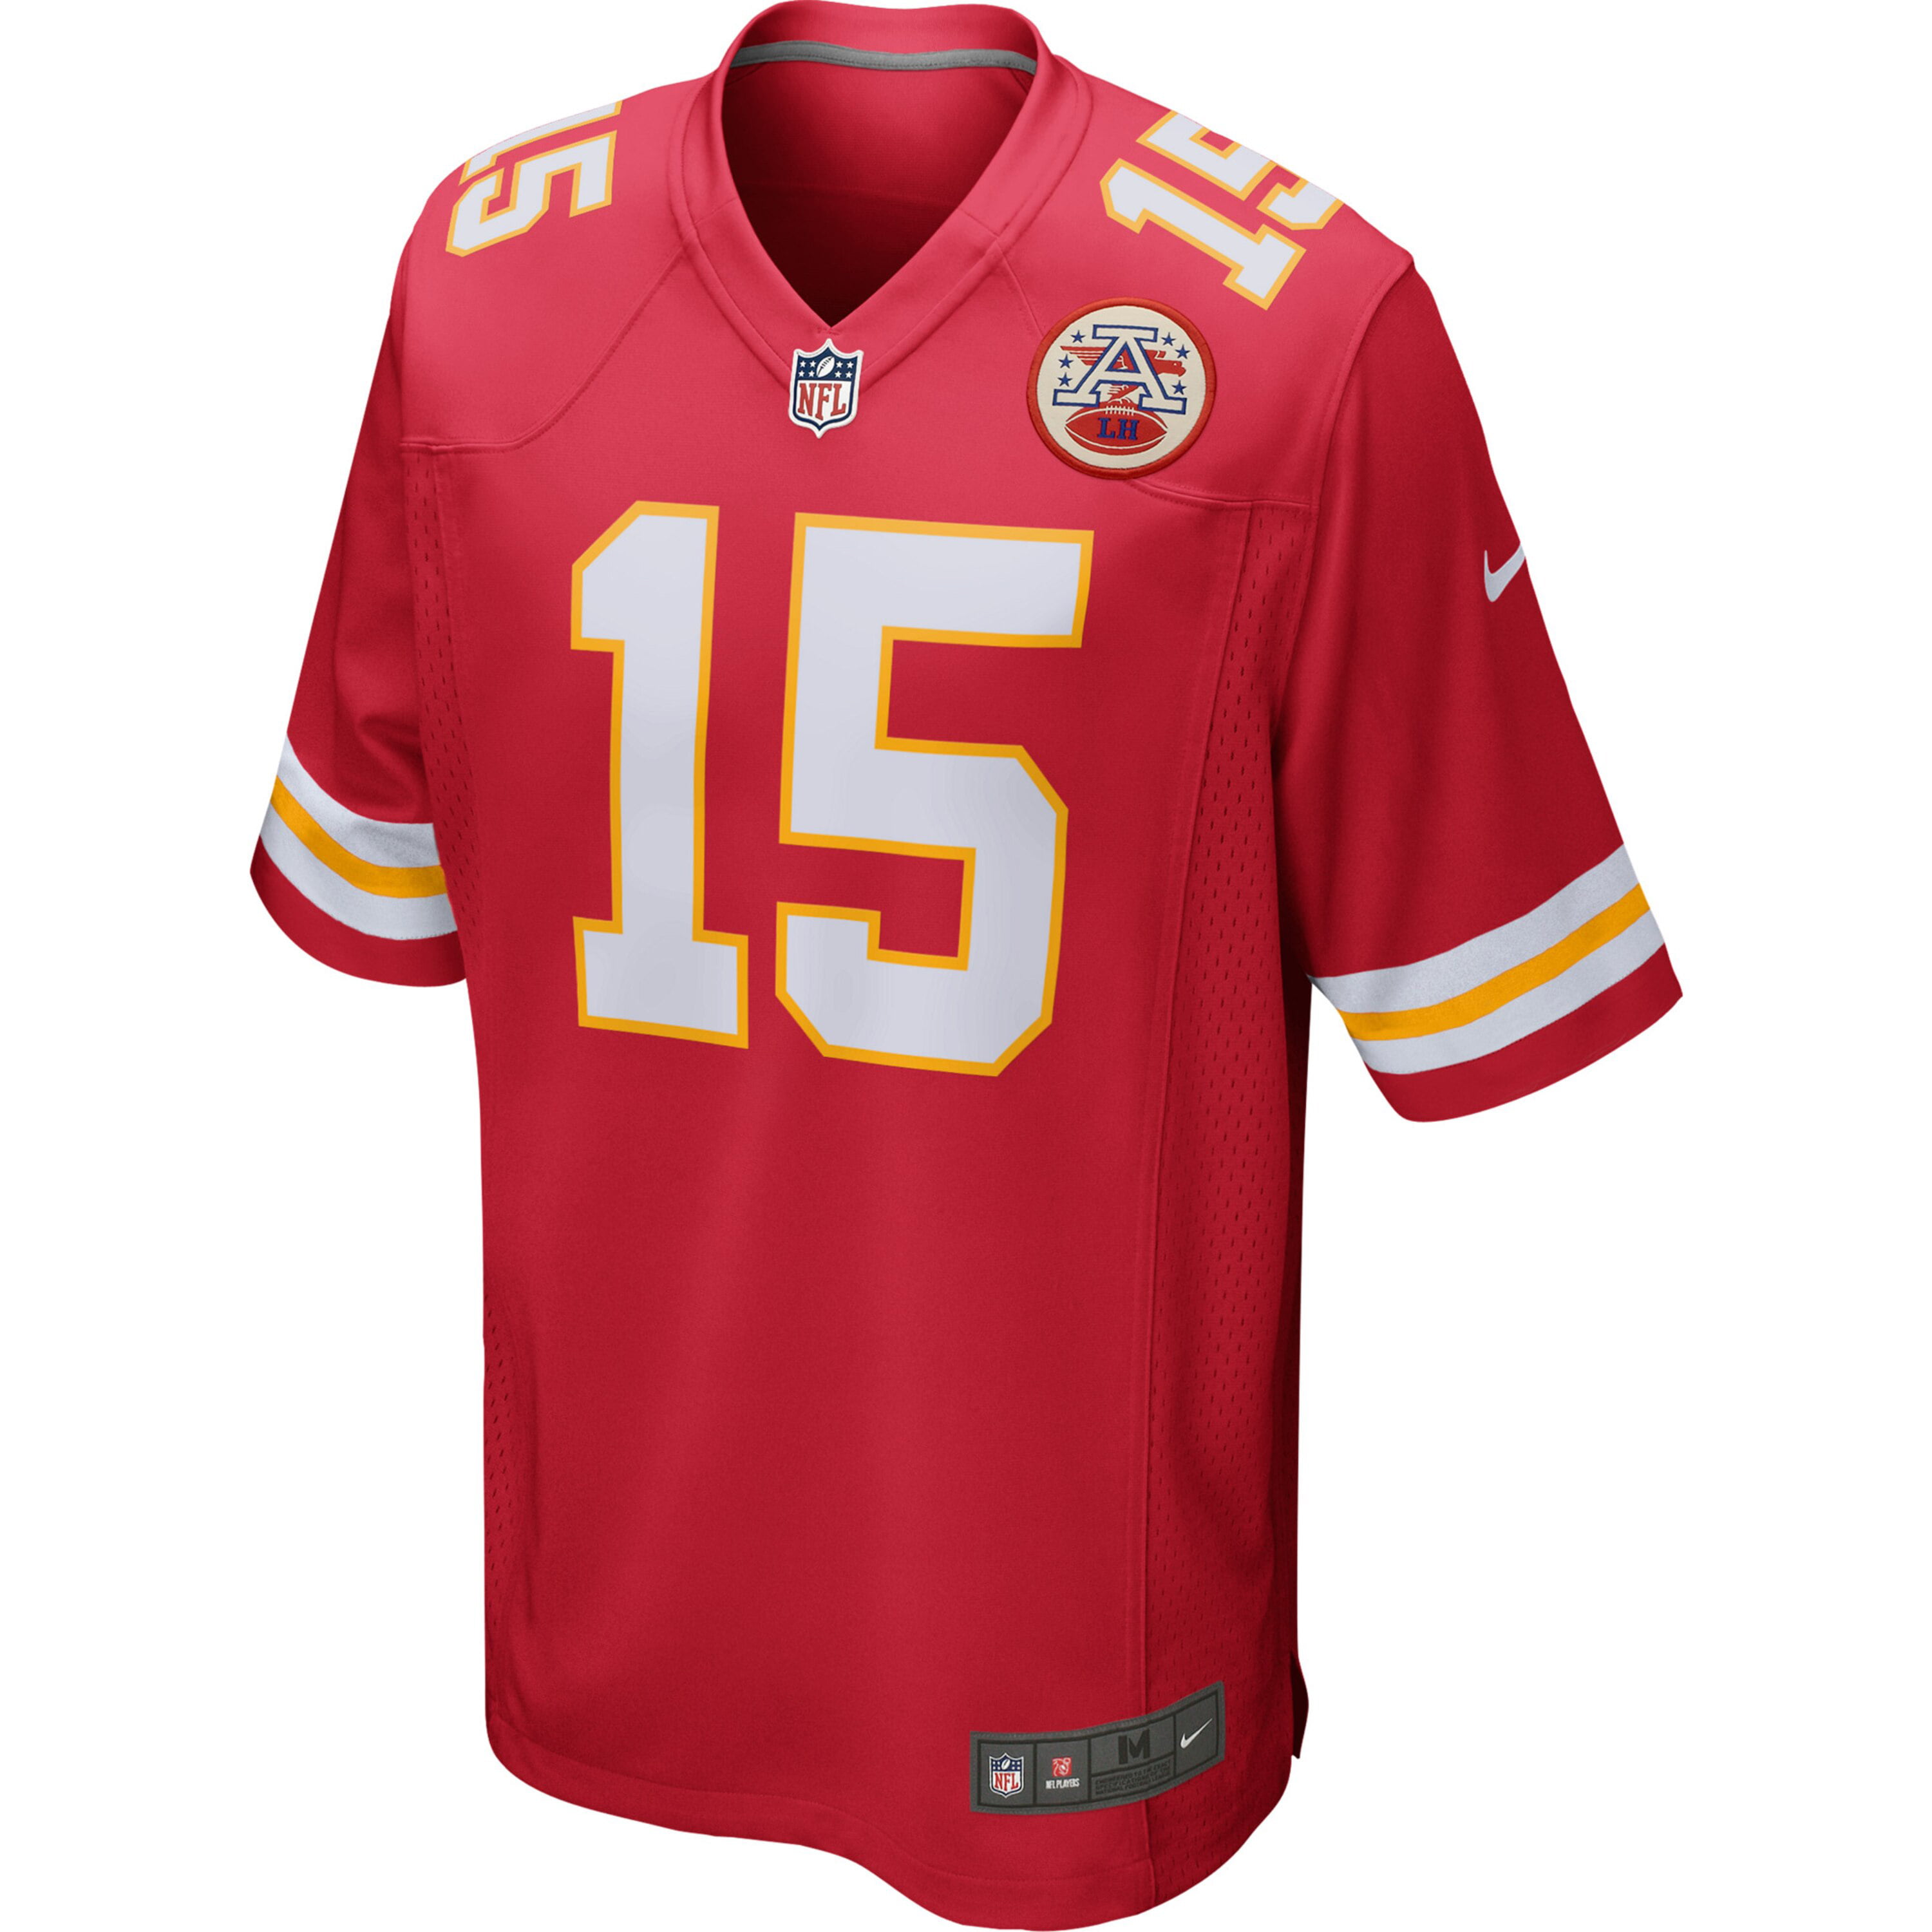 mahomes jersey for kids